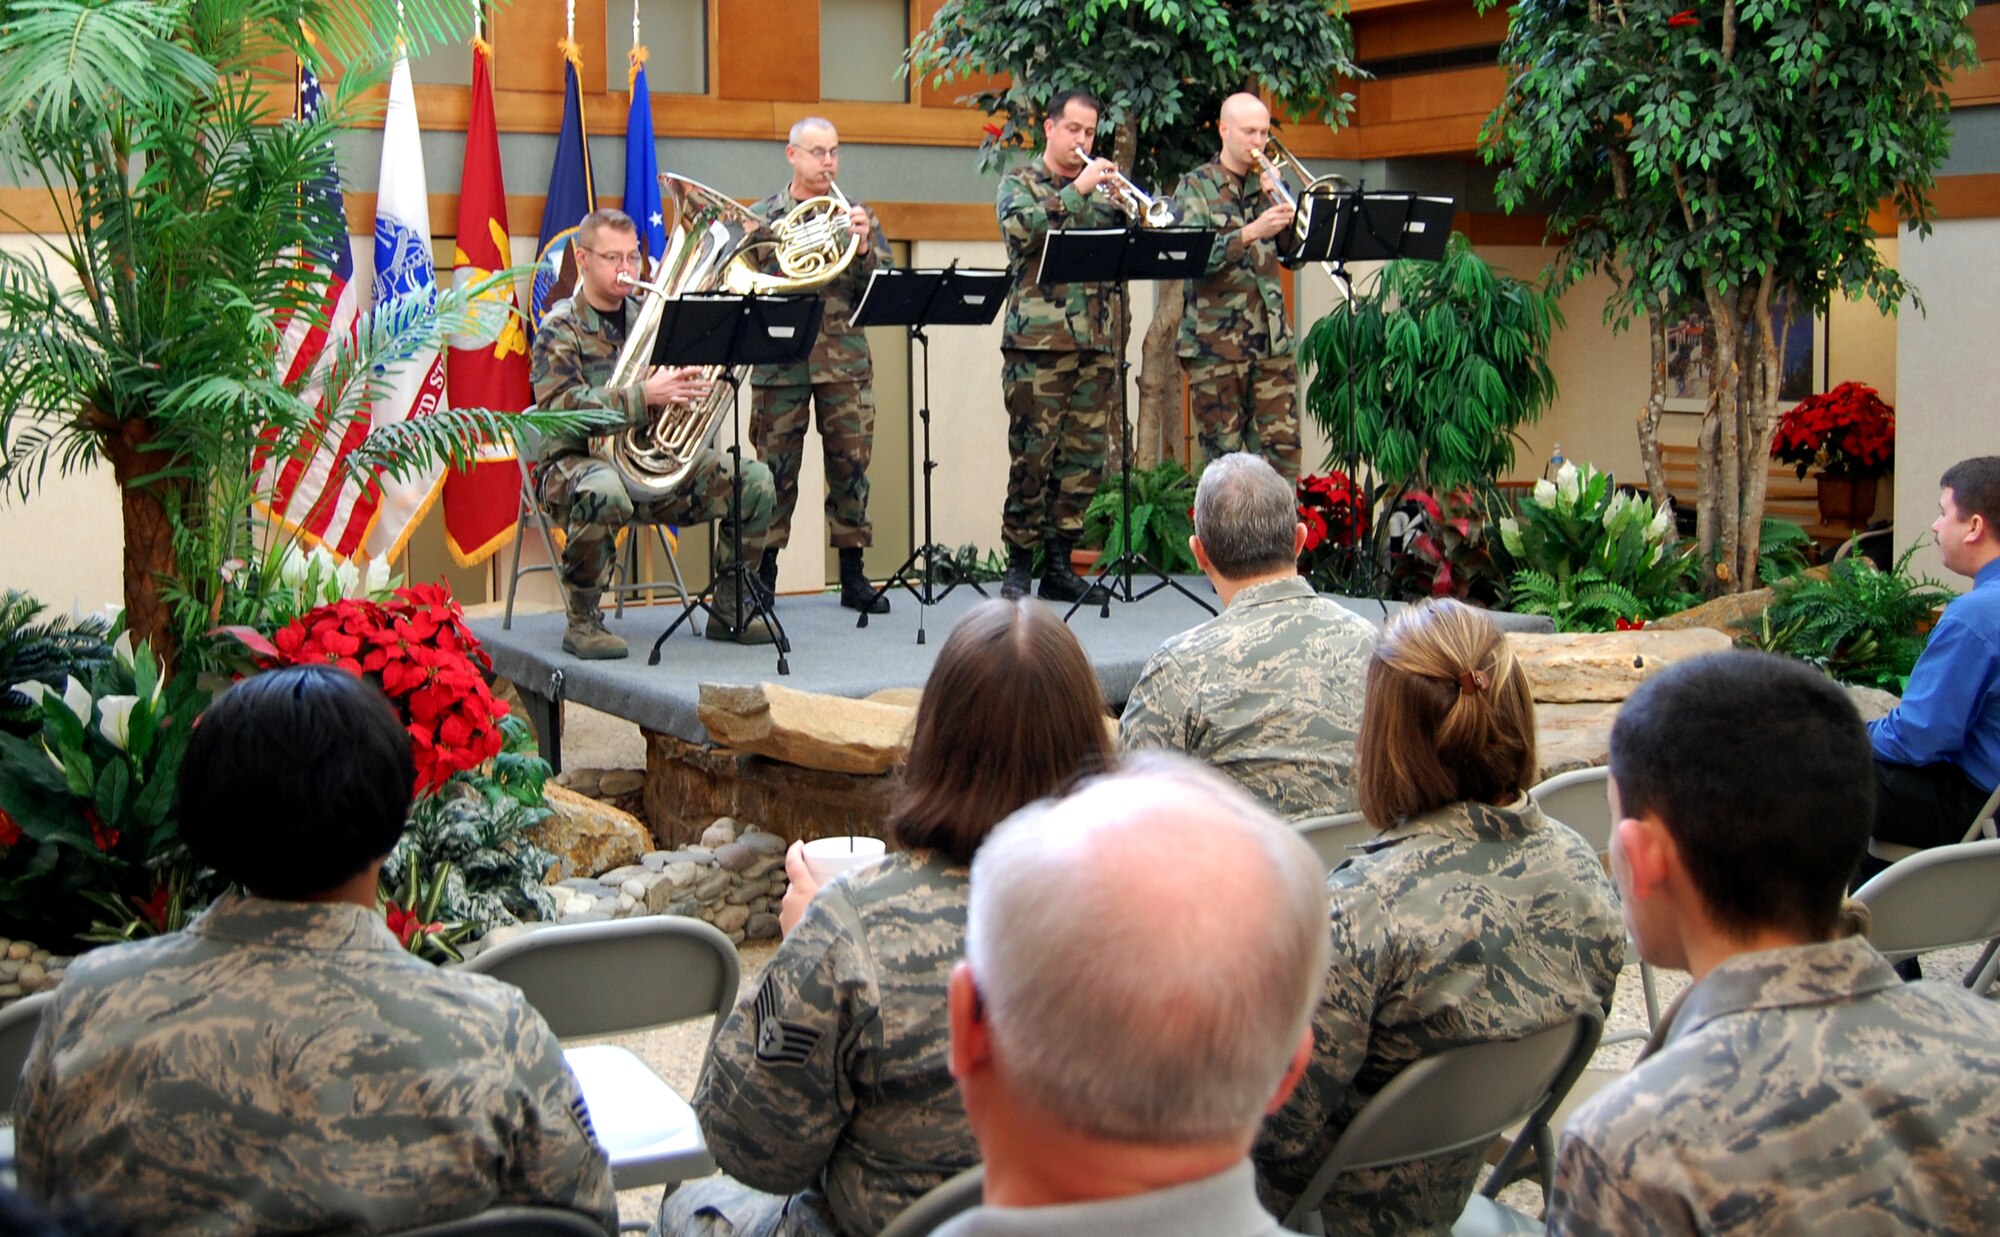 The Air Force Heritage Band Brass Quartet entertains members of the Air Force Mortuary Affairs Operations Center with Christmas carols Dec. 16. (U.S. Air Force photo by Ed Drohan, AFMAO/PA)